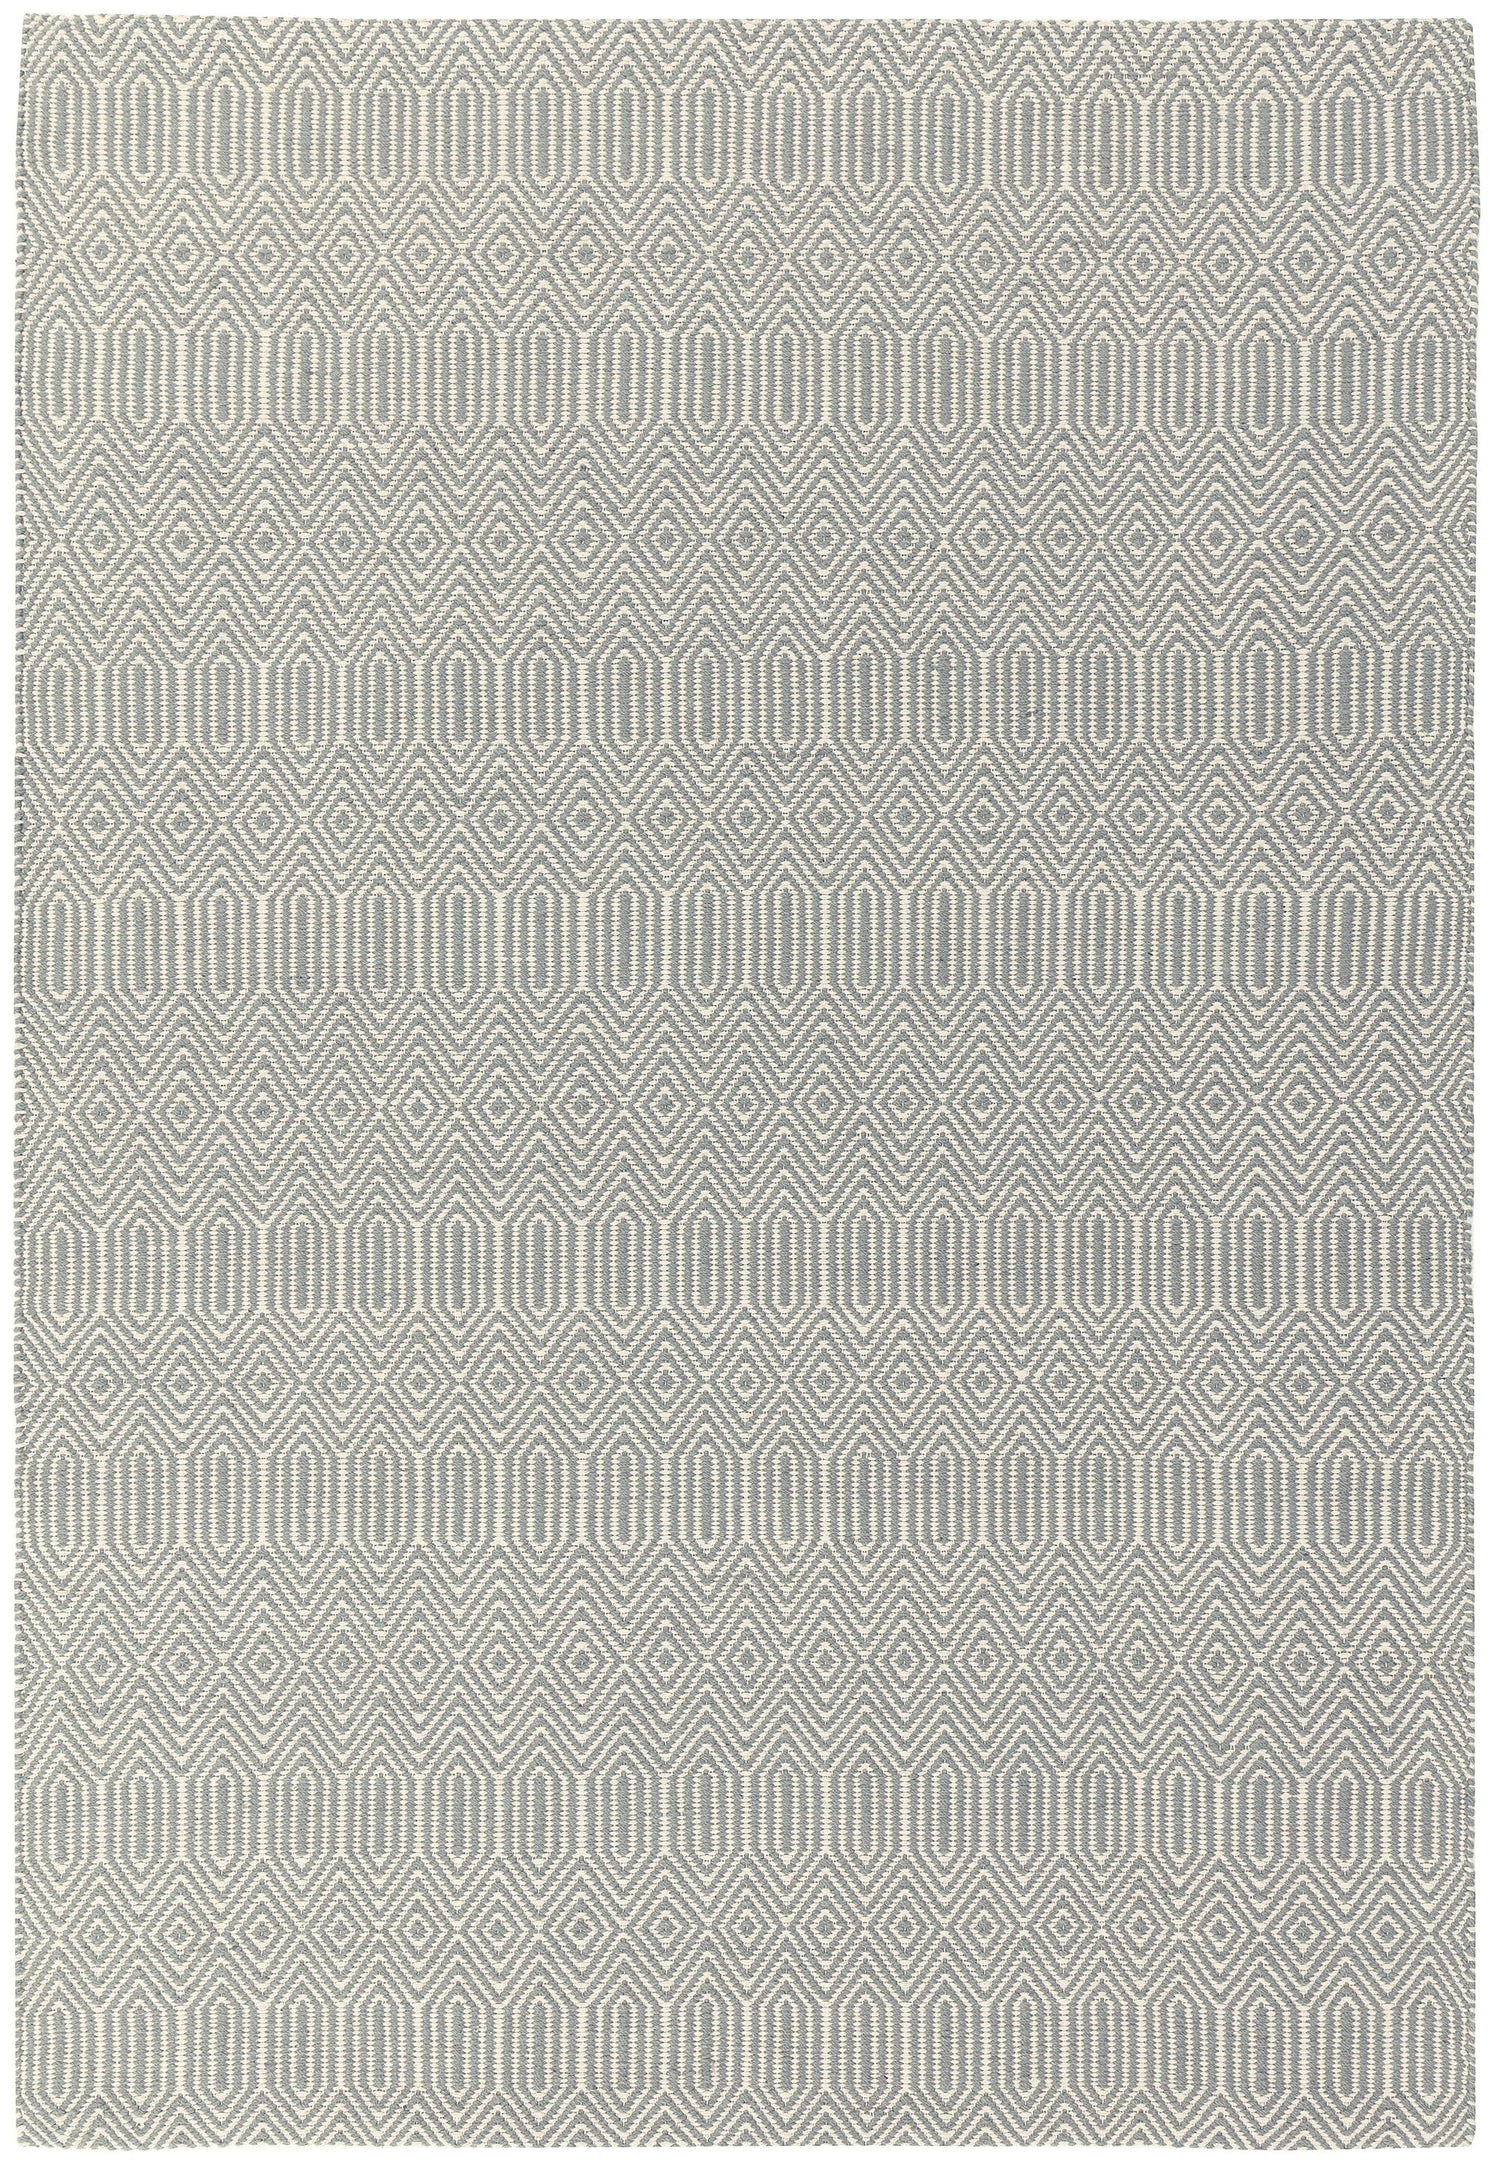  Asiatic Carpets-Asiatic Carpets Sloan Hand Woven Rug Silver - 100 x 150cm-Grey, Silver 789 